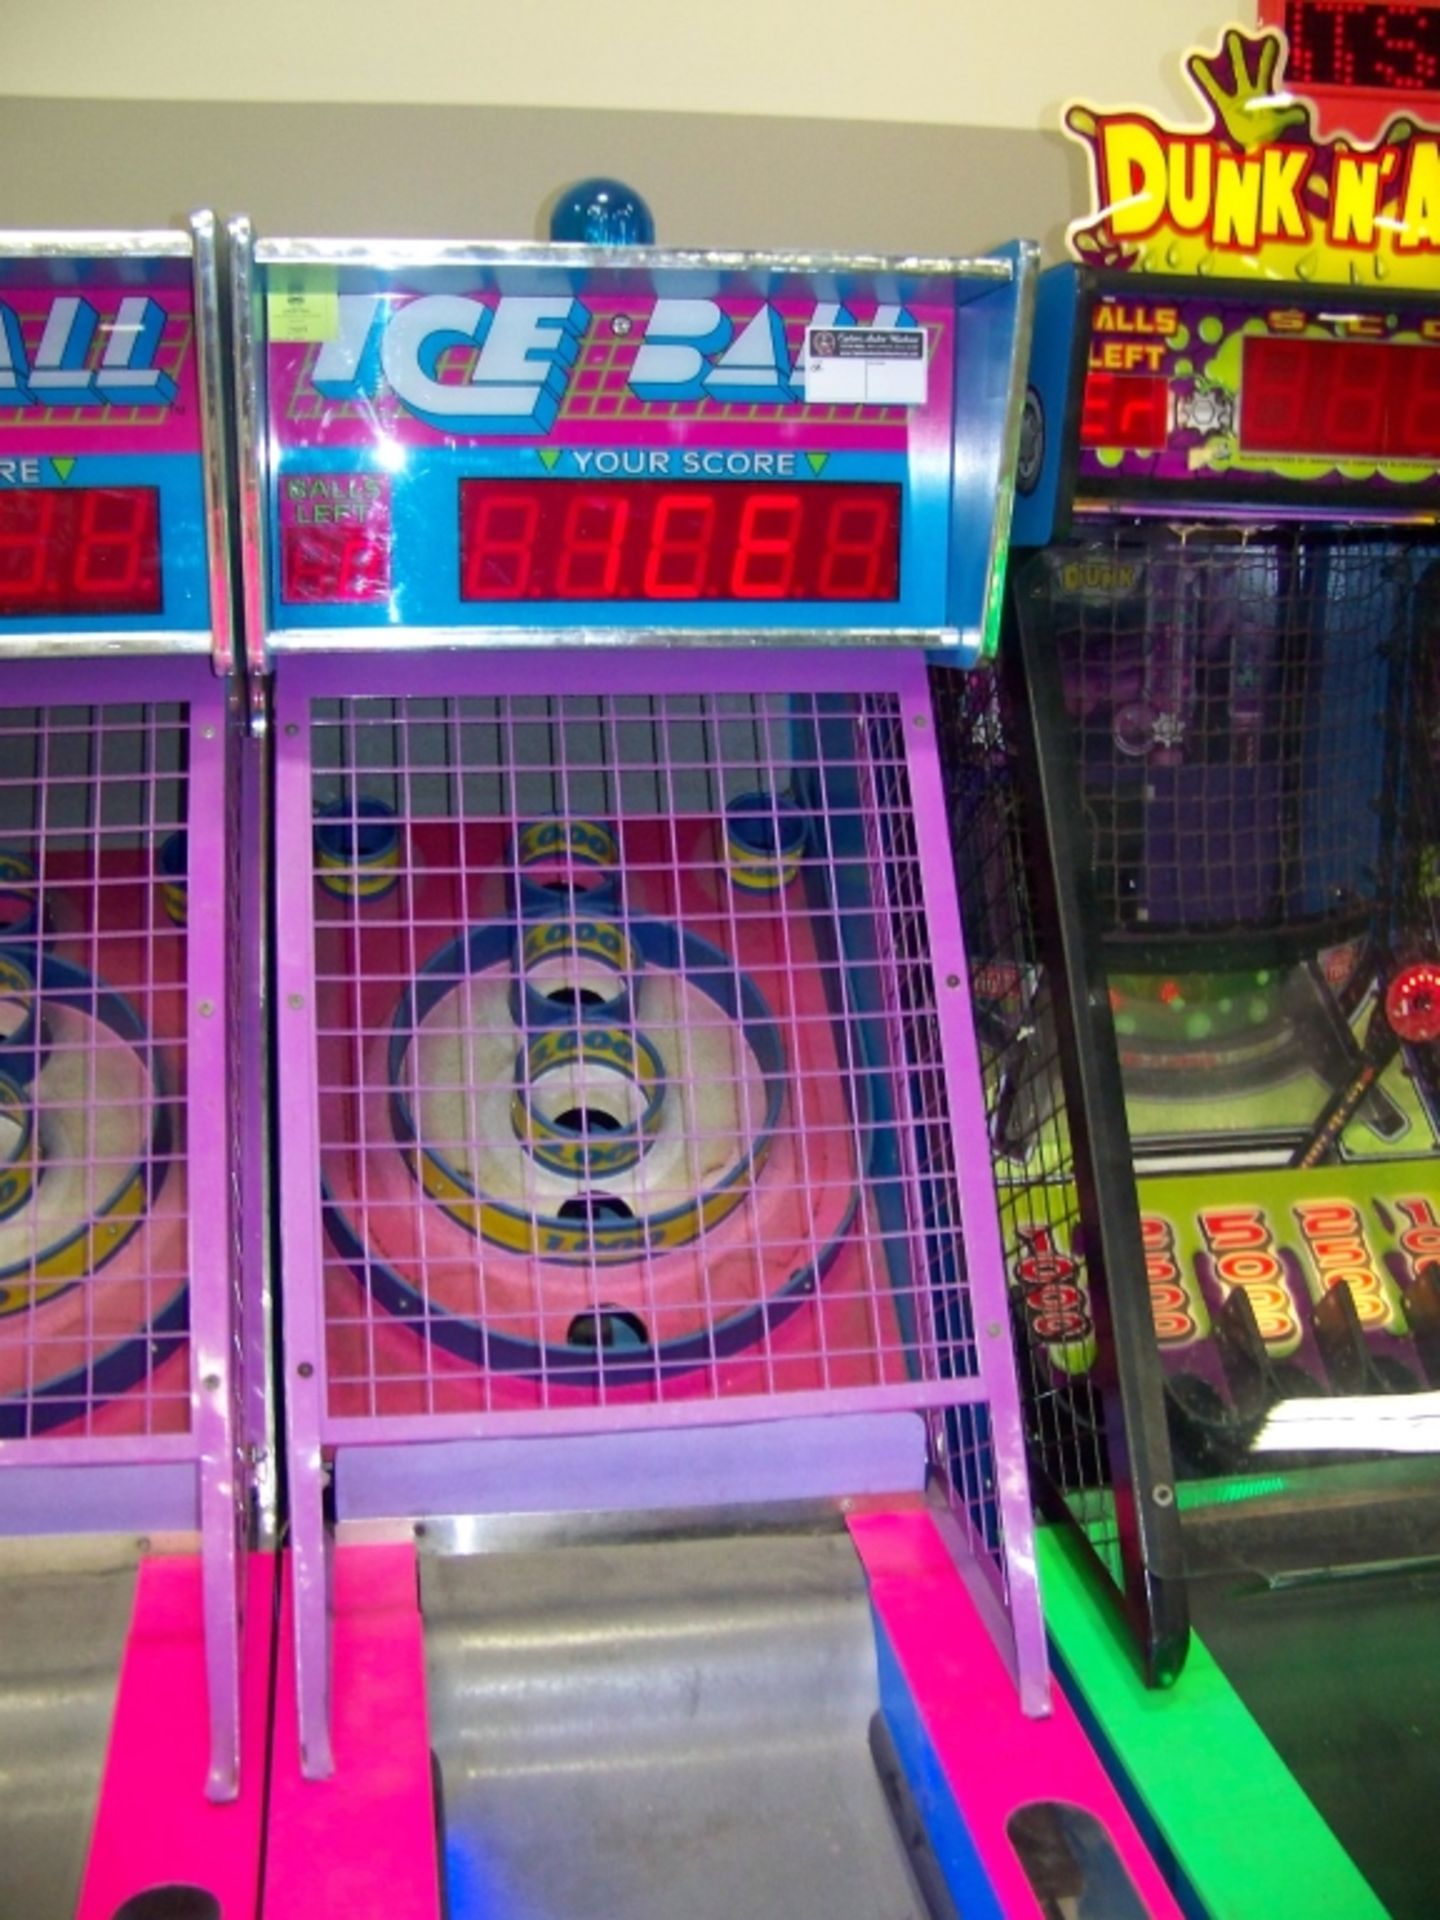 ICE BALL ALLEY ROLLER REDEMPTION GAME I.C.E. - Image 3 of 3